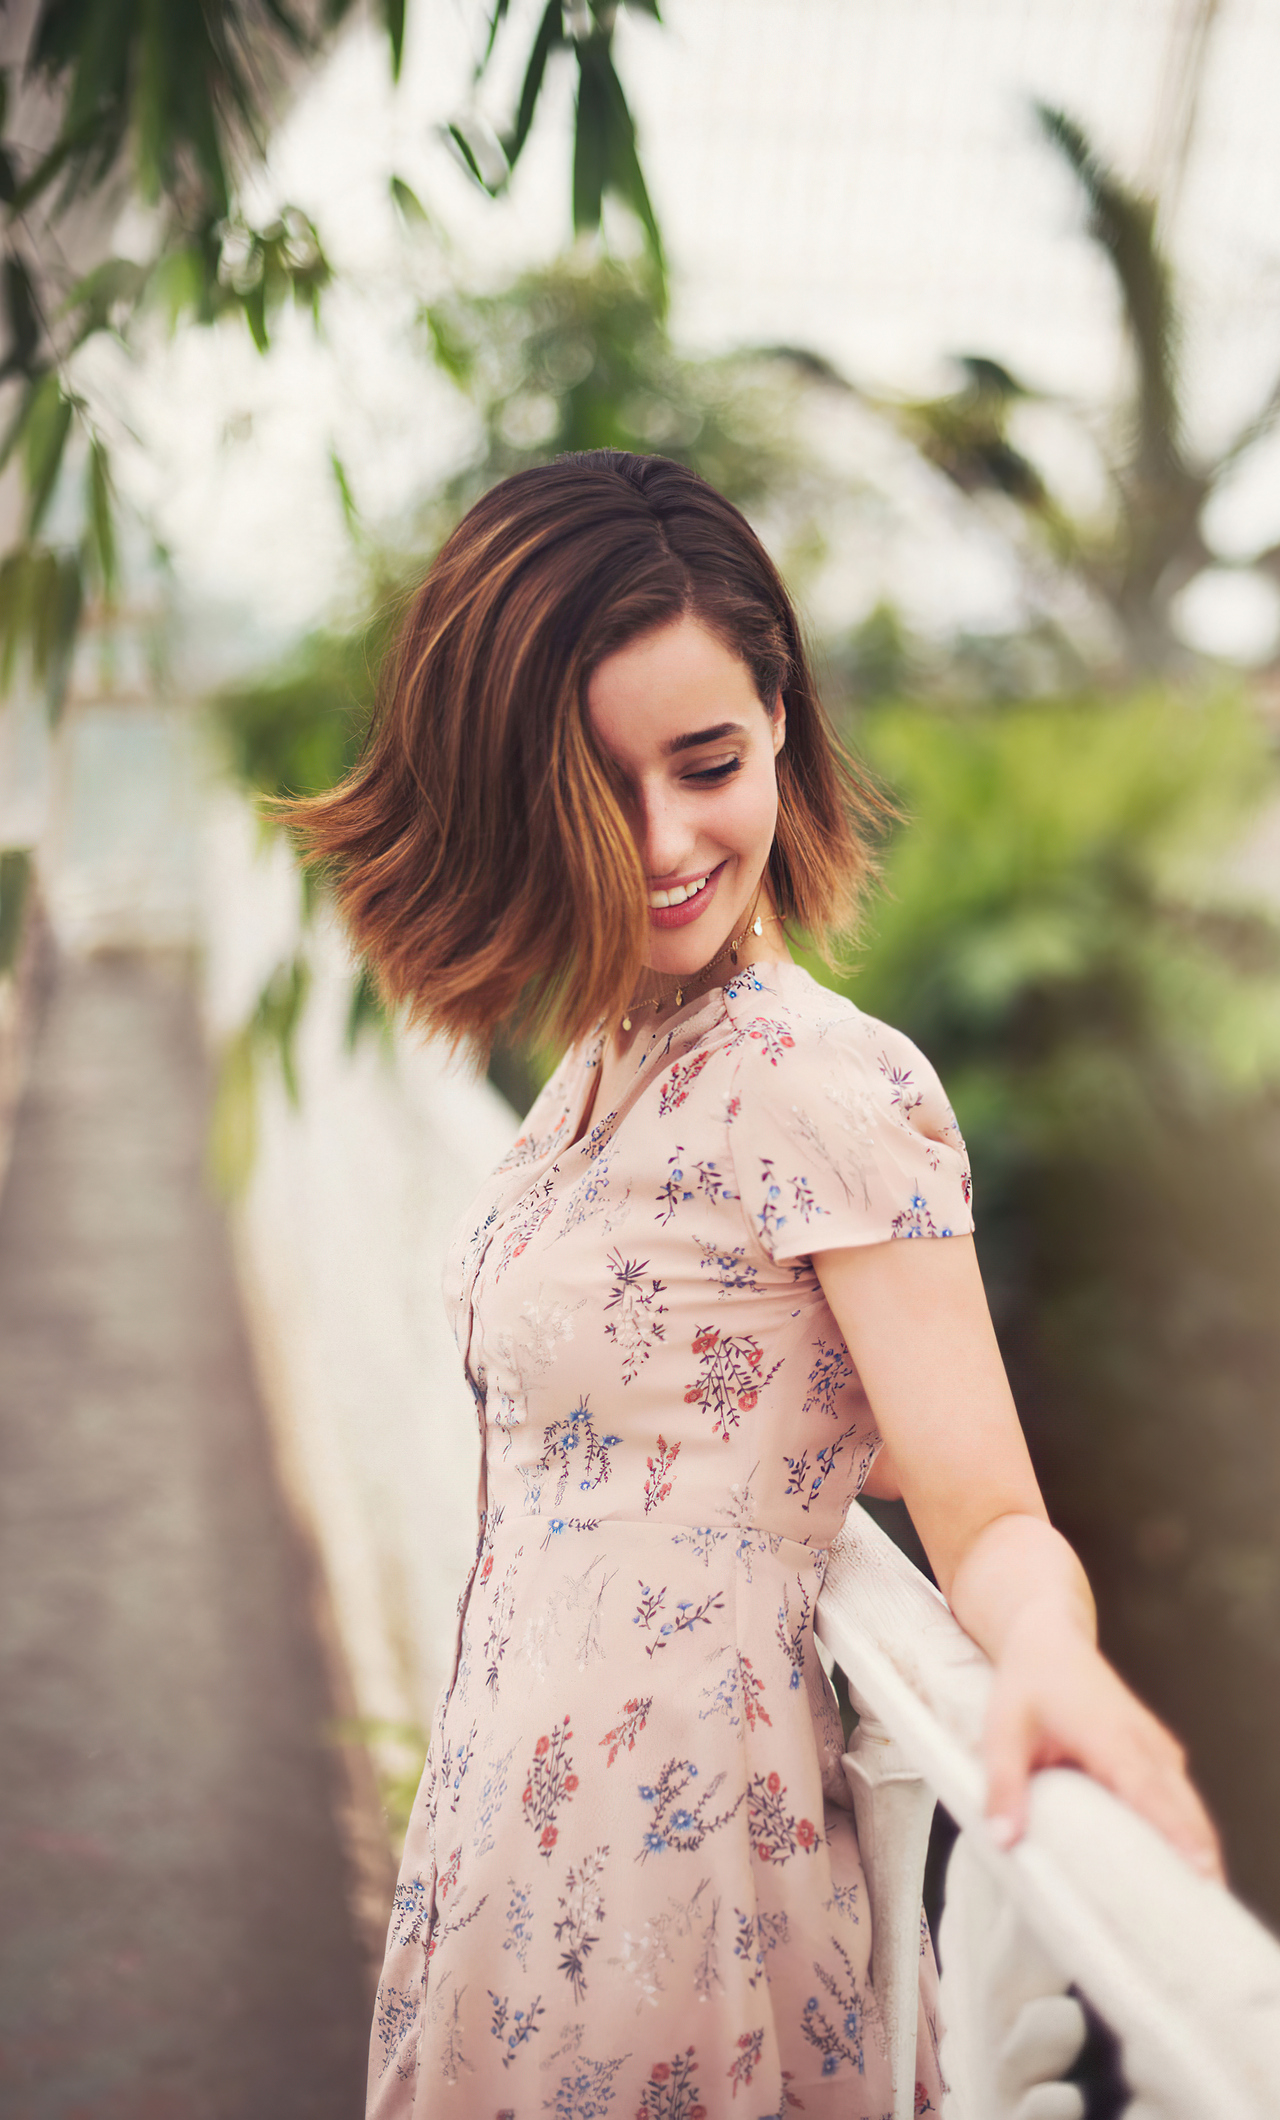 Holly Earl Smiling 2021 In 1280x2120 Resolution. 